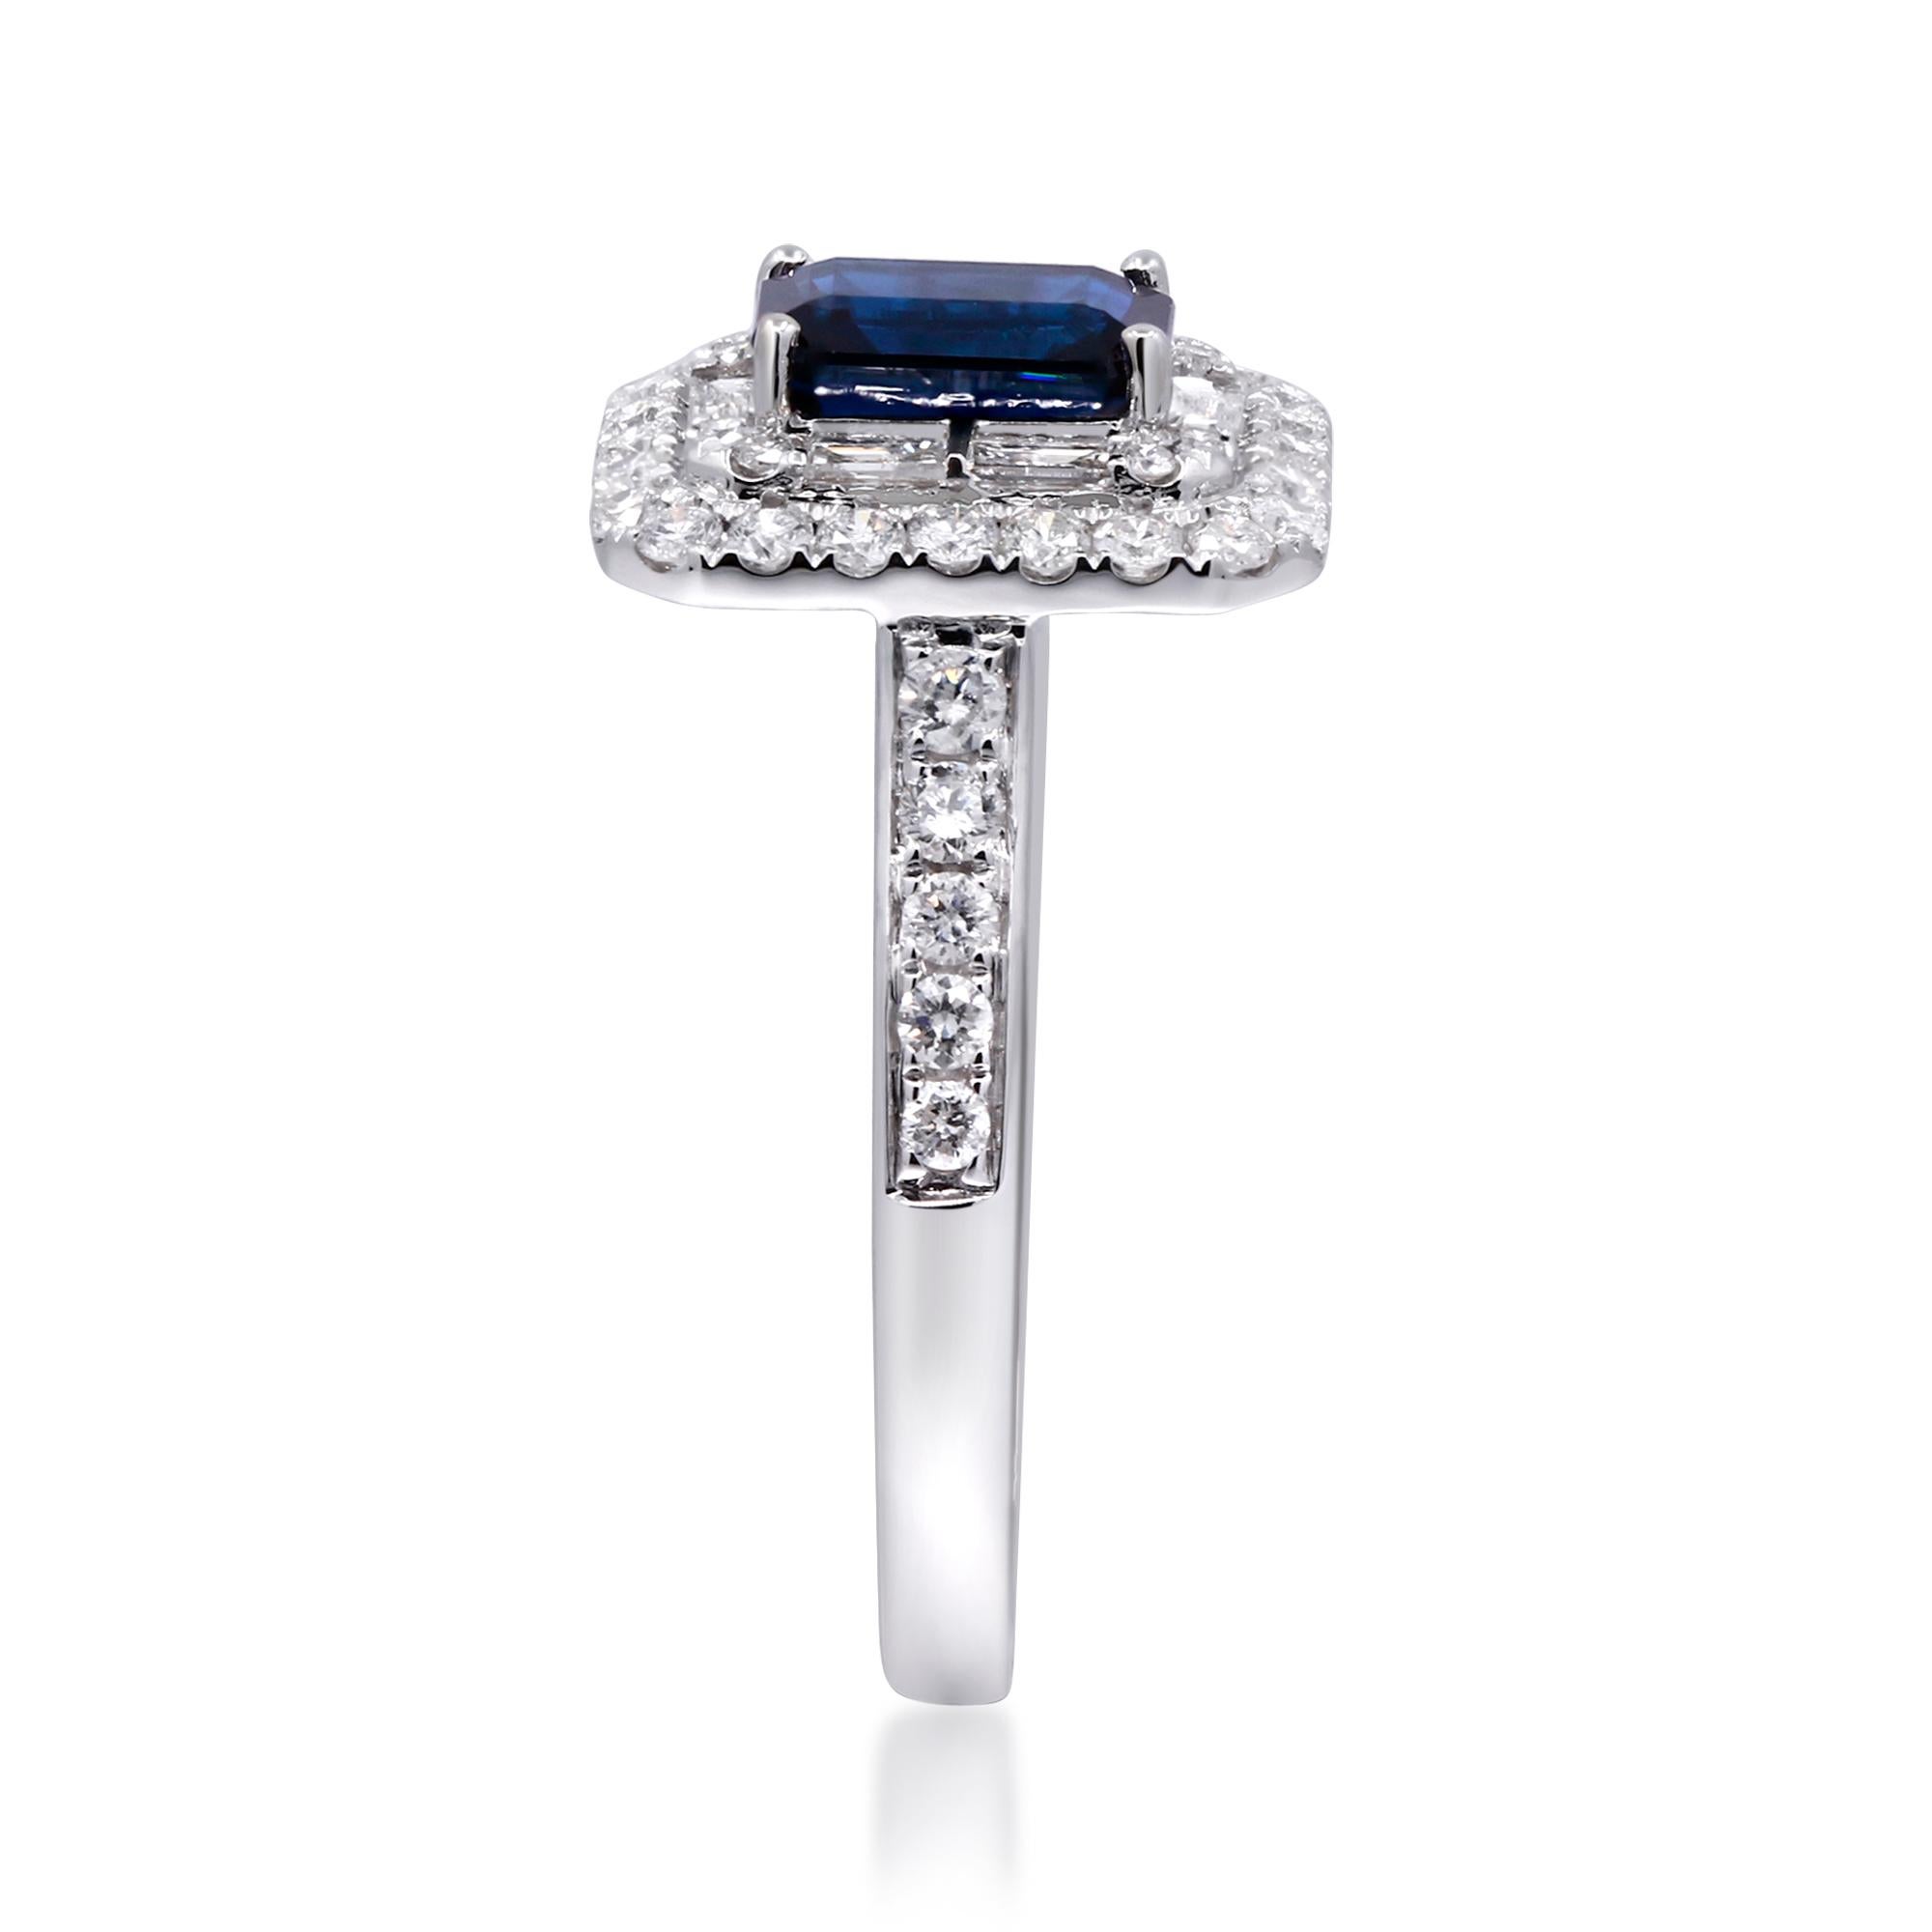 1.18 Carat Emerald-Cut Blue Sapphire with Diamond Accents 10K White Gold Ring In New Condition For Sale In New York, NY